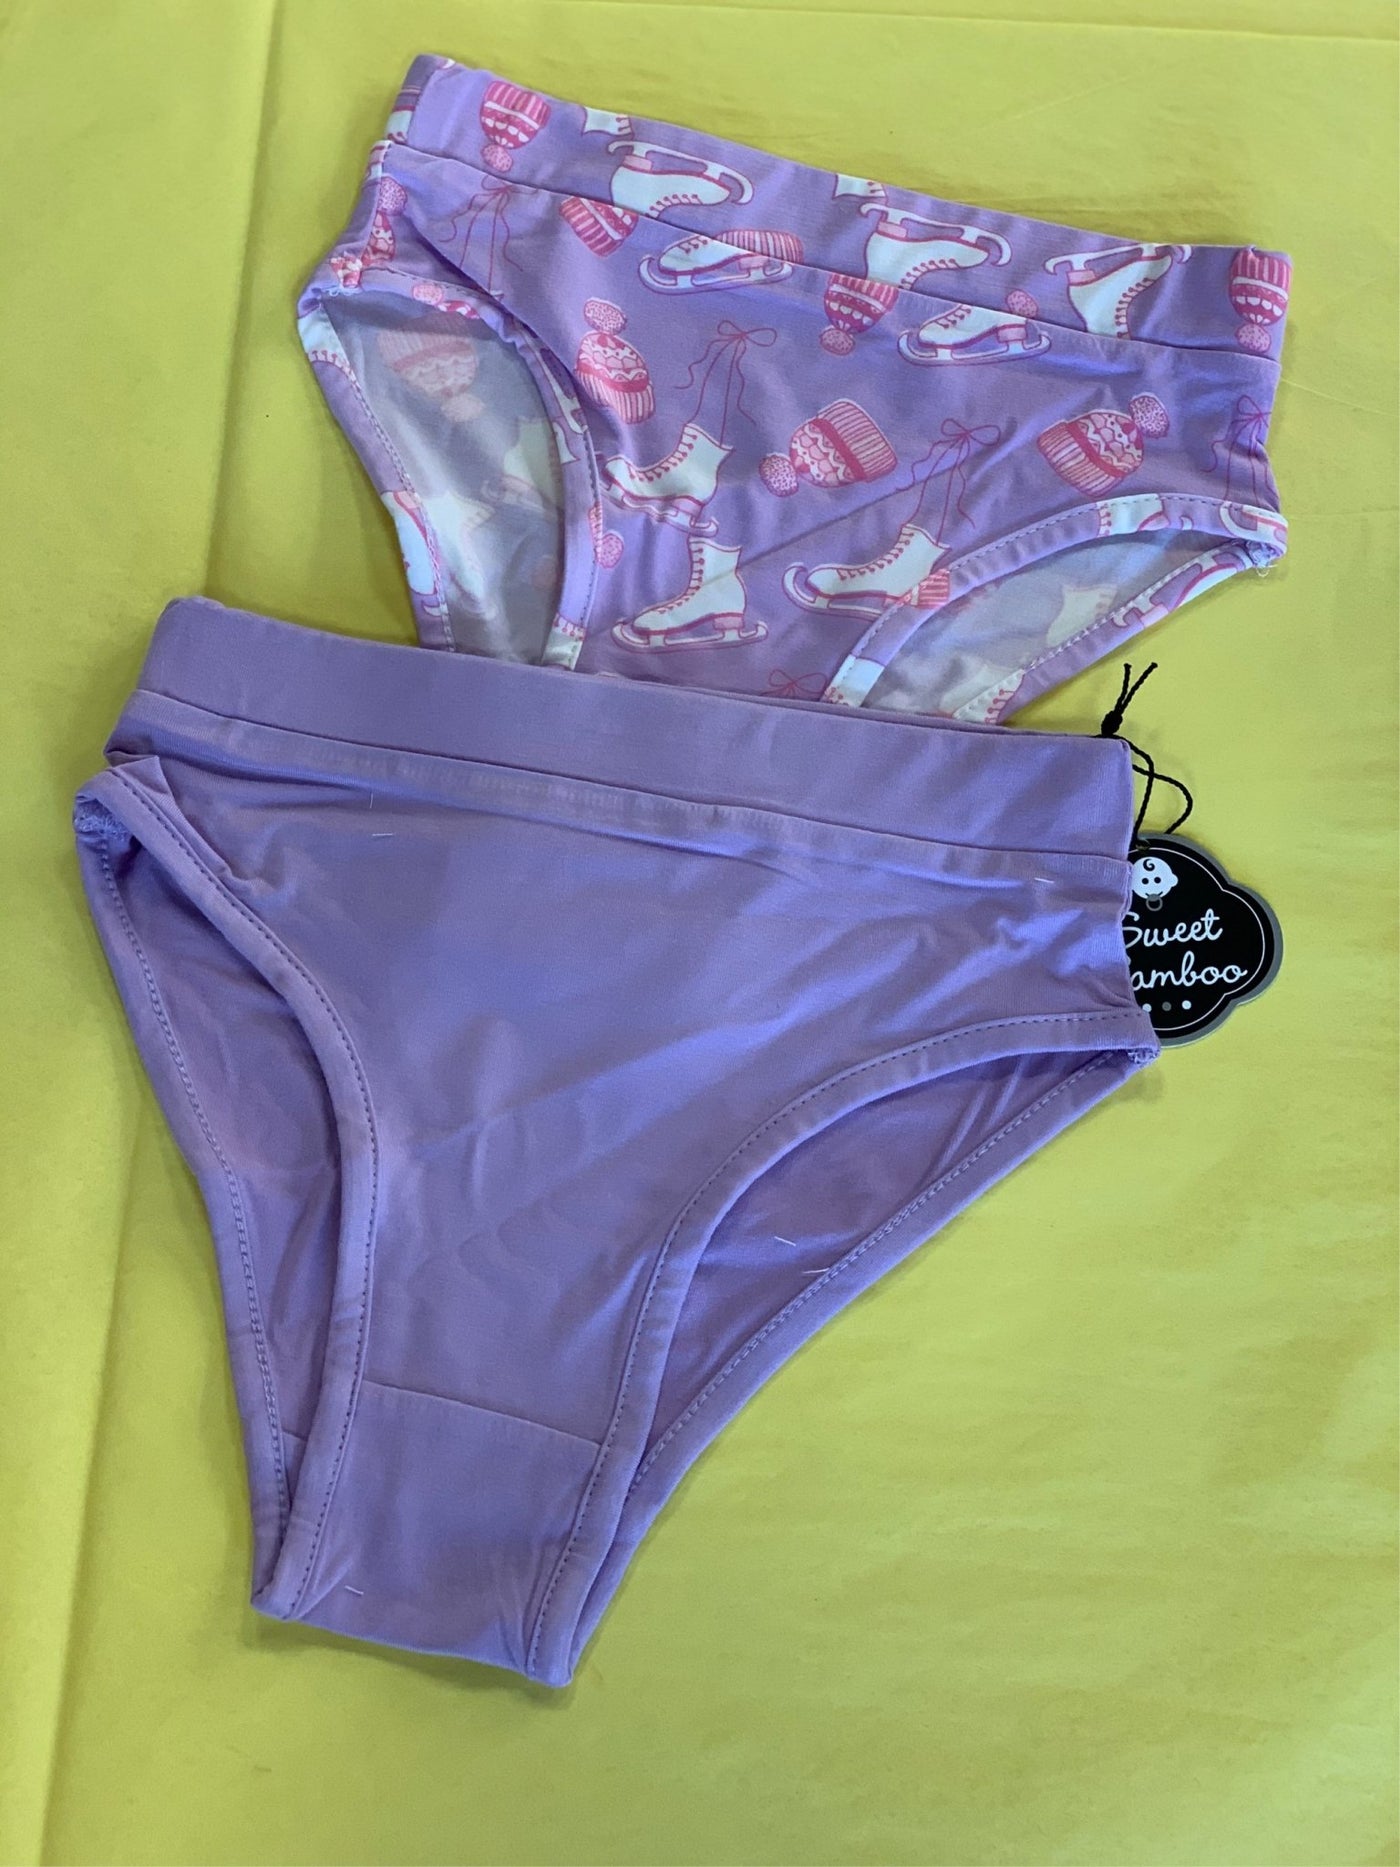 Sweet Bamboo 2 Piece Underwear In Purple Ice Skates and Solid